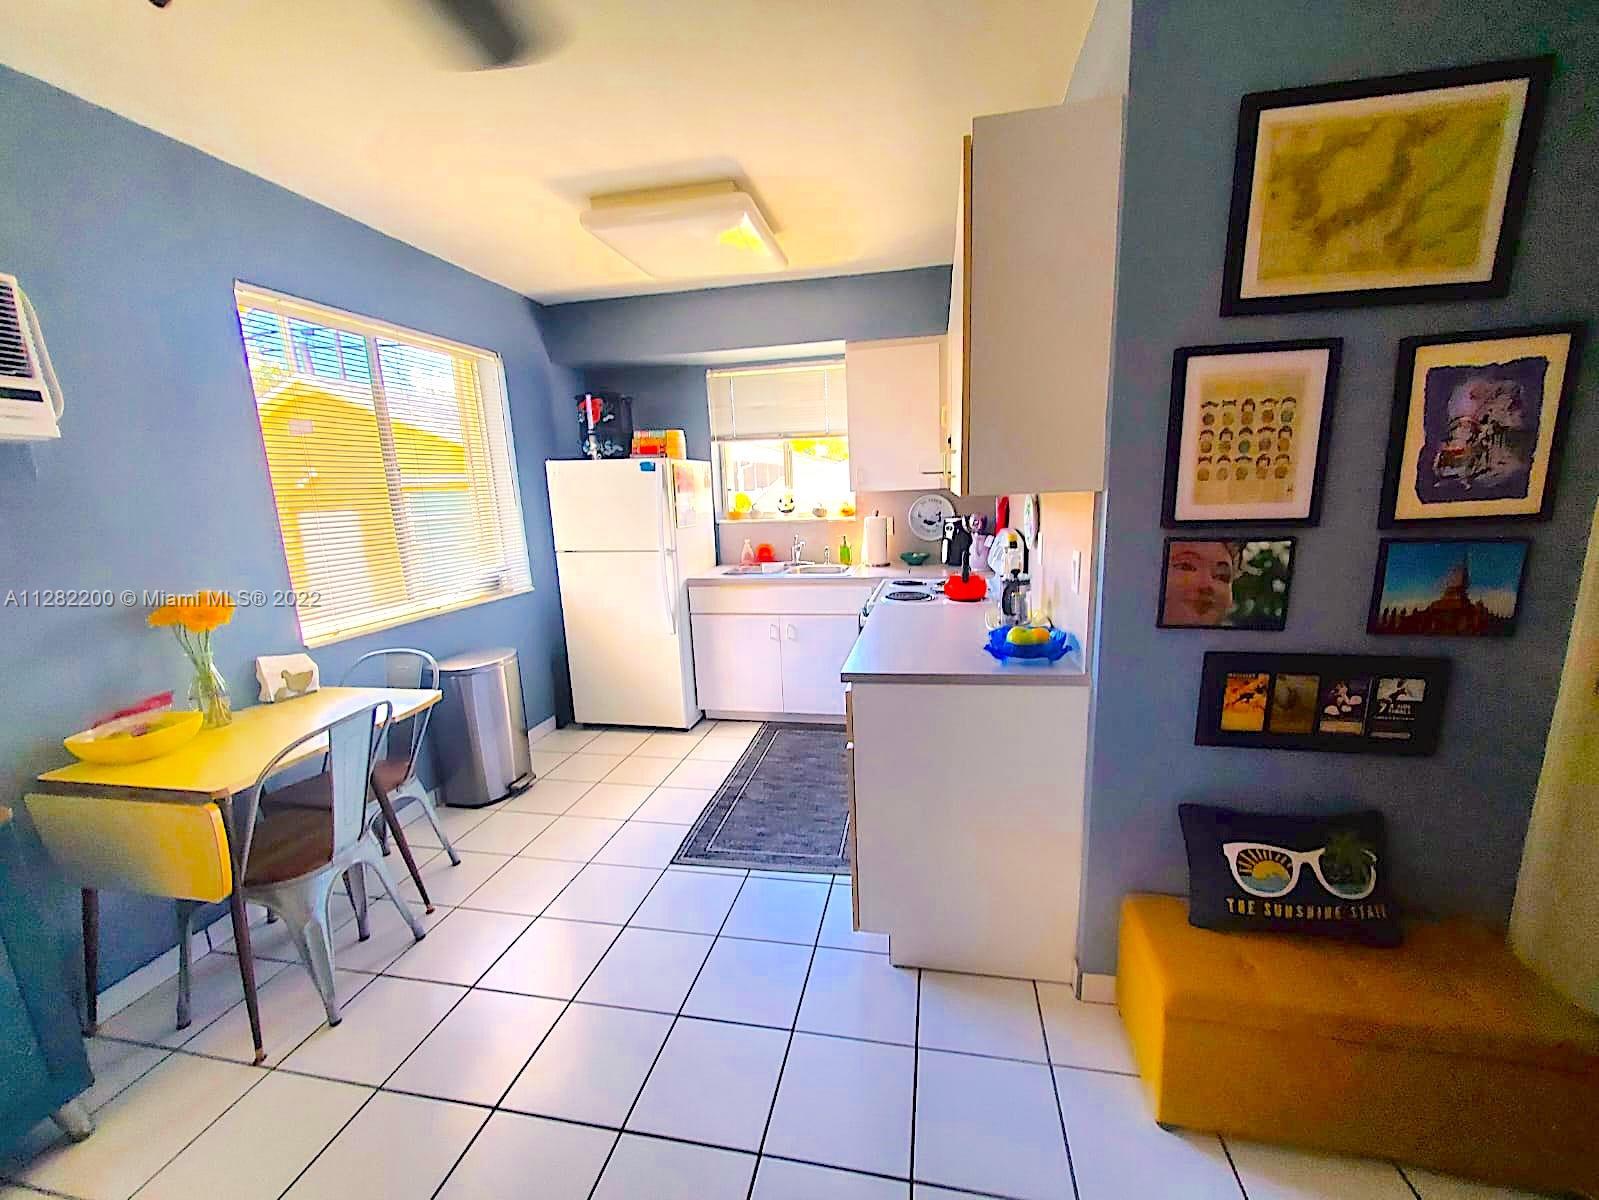 LOCATION LOCATION LOCATION! Clean and Bright 1/1 within walking distance to Miracle Mile, Shopping & Dining. Close to University of Miami, Coral Gables, Coconut Grove, MIA, Brickell & Downtown. Rent Includes Water, Cable TV, Internet and Waste Pick up.